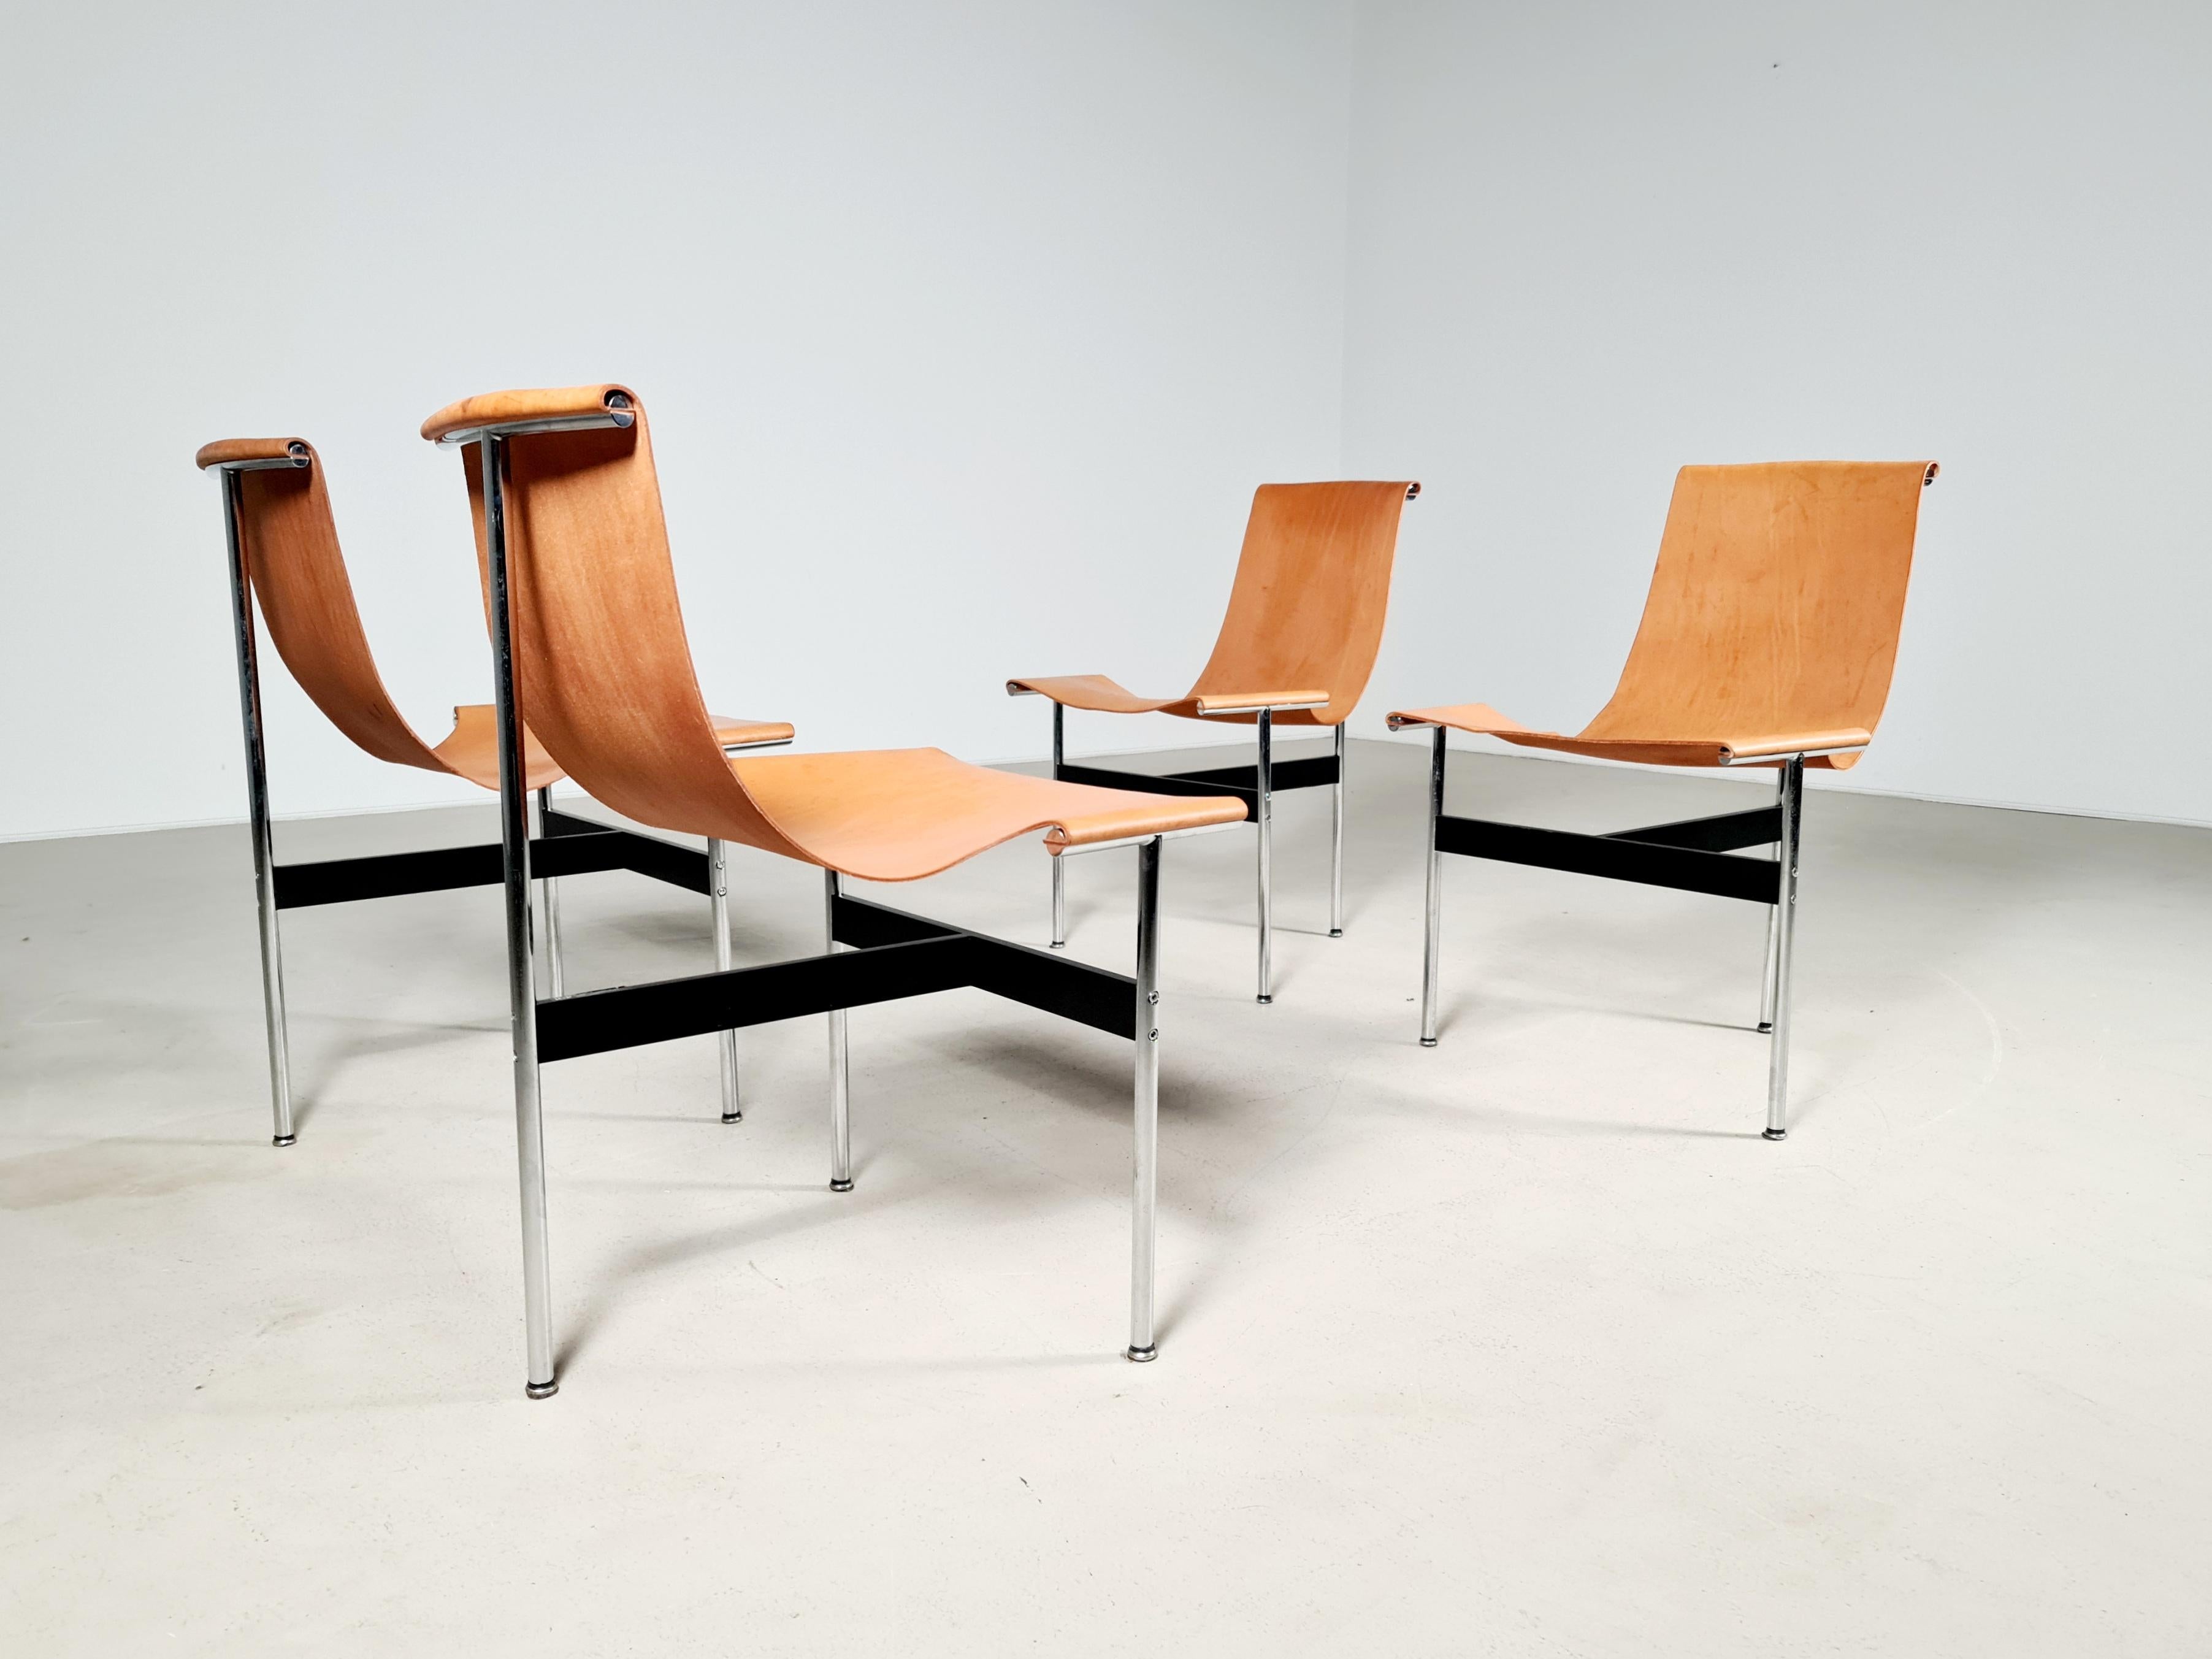 T-chairs in chrome-plated and enameled steel with original black leather sling, designed by William Katavolos, Ross Littell, and Douglas Kelley. A cornerstone of the acclaimed Laverne International 